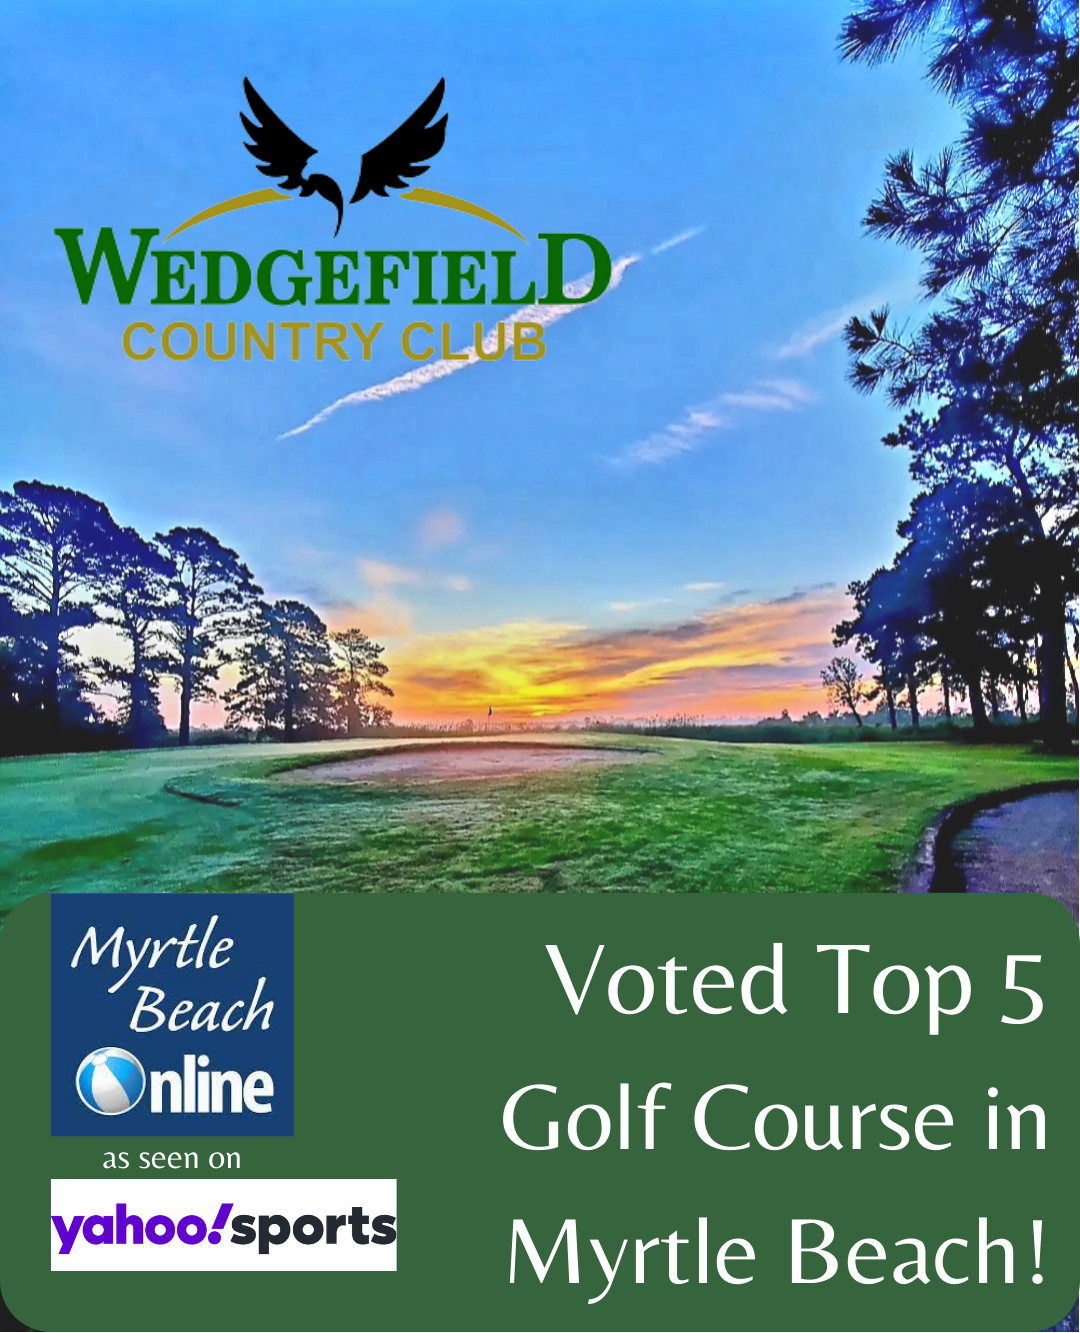 Voted Top 5 Golf Course in Myrtle Beach by